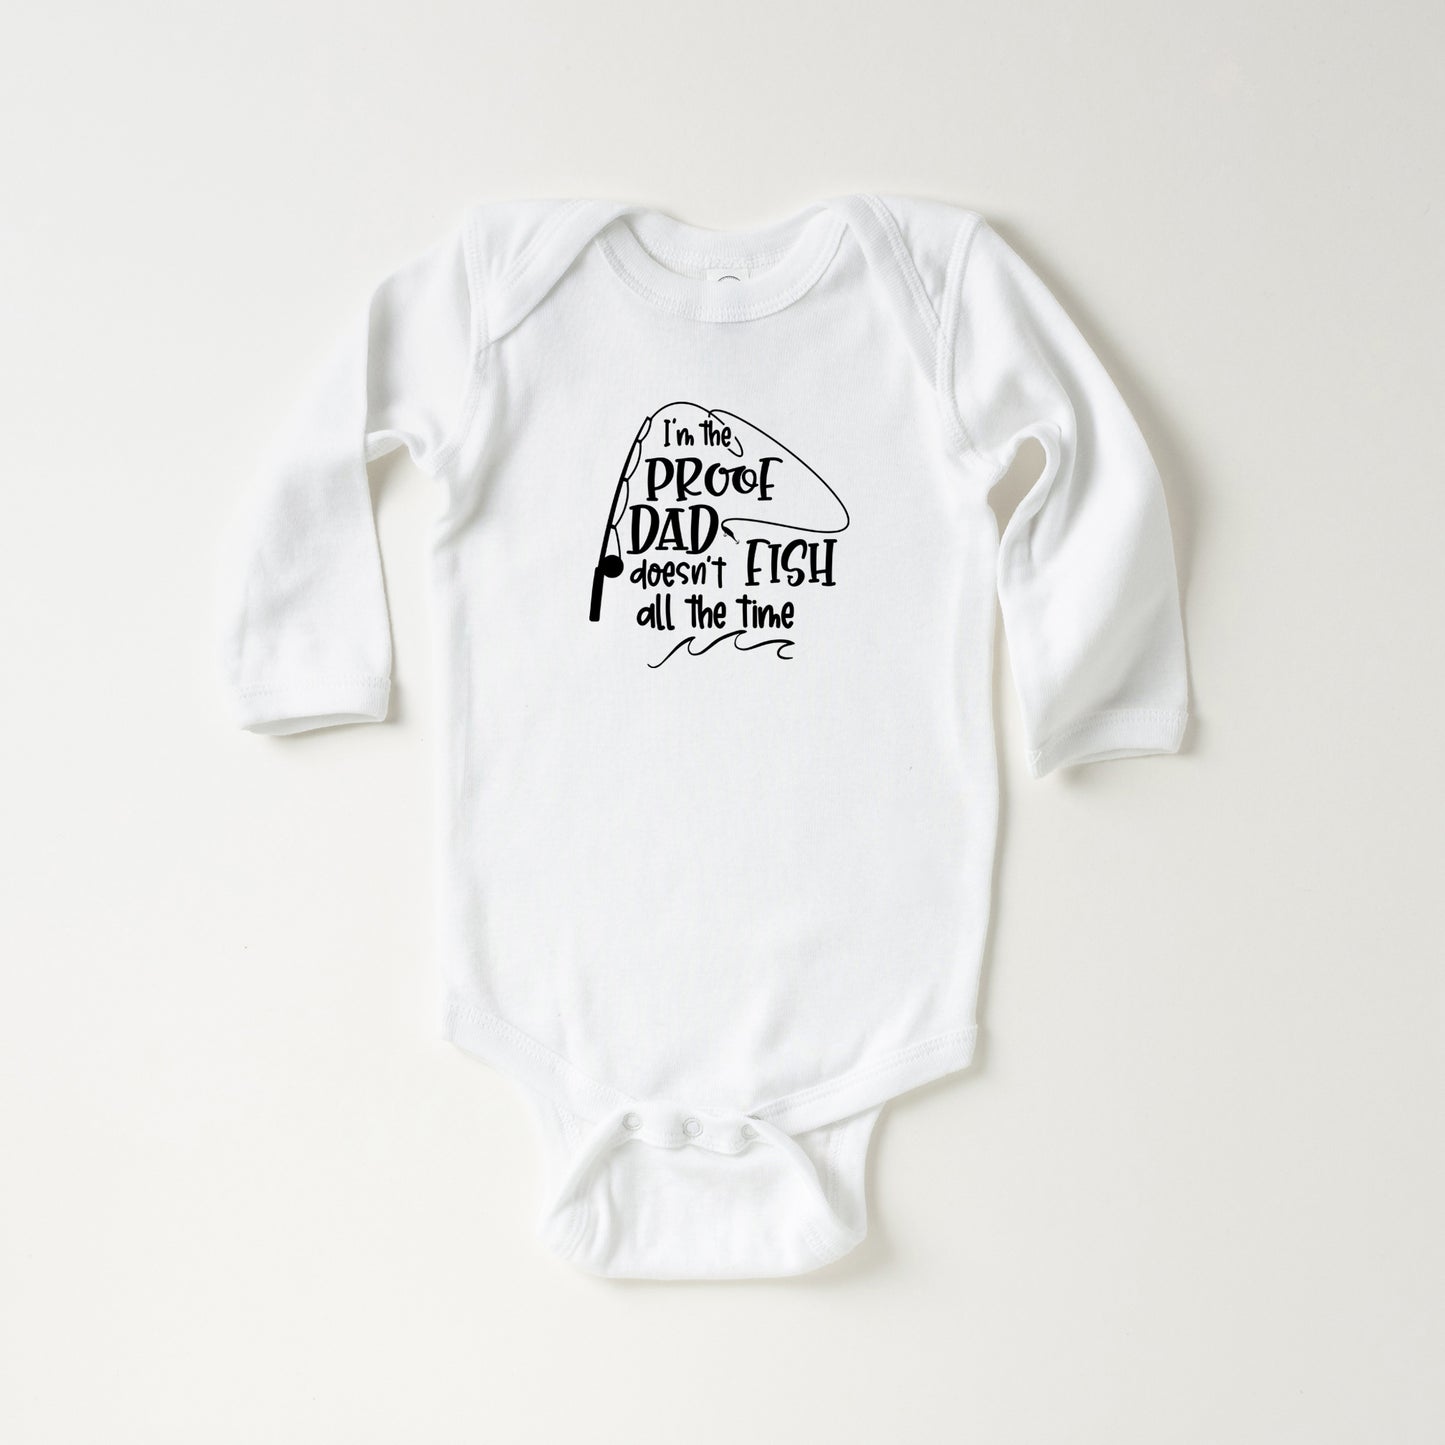 Proof Dad Doesn't Fish All The Time | Baby Long Sleeve Onesie